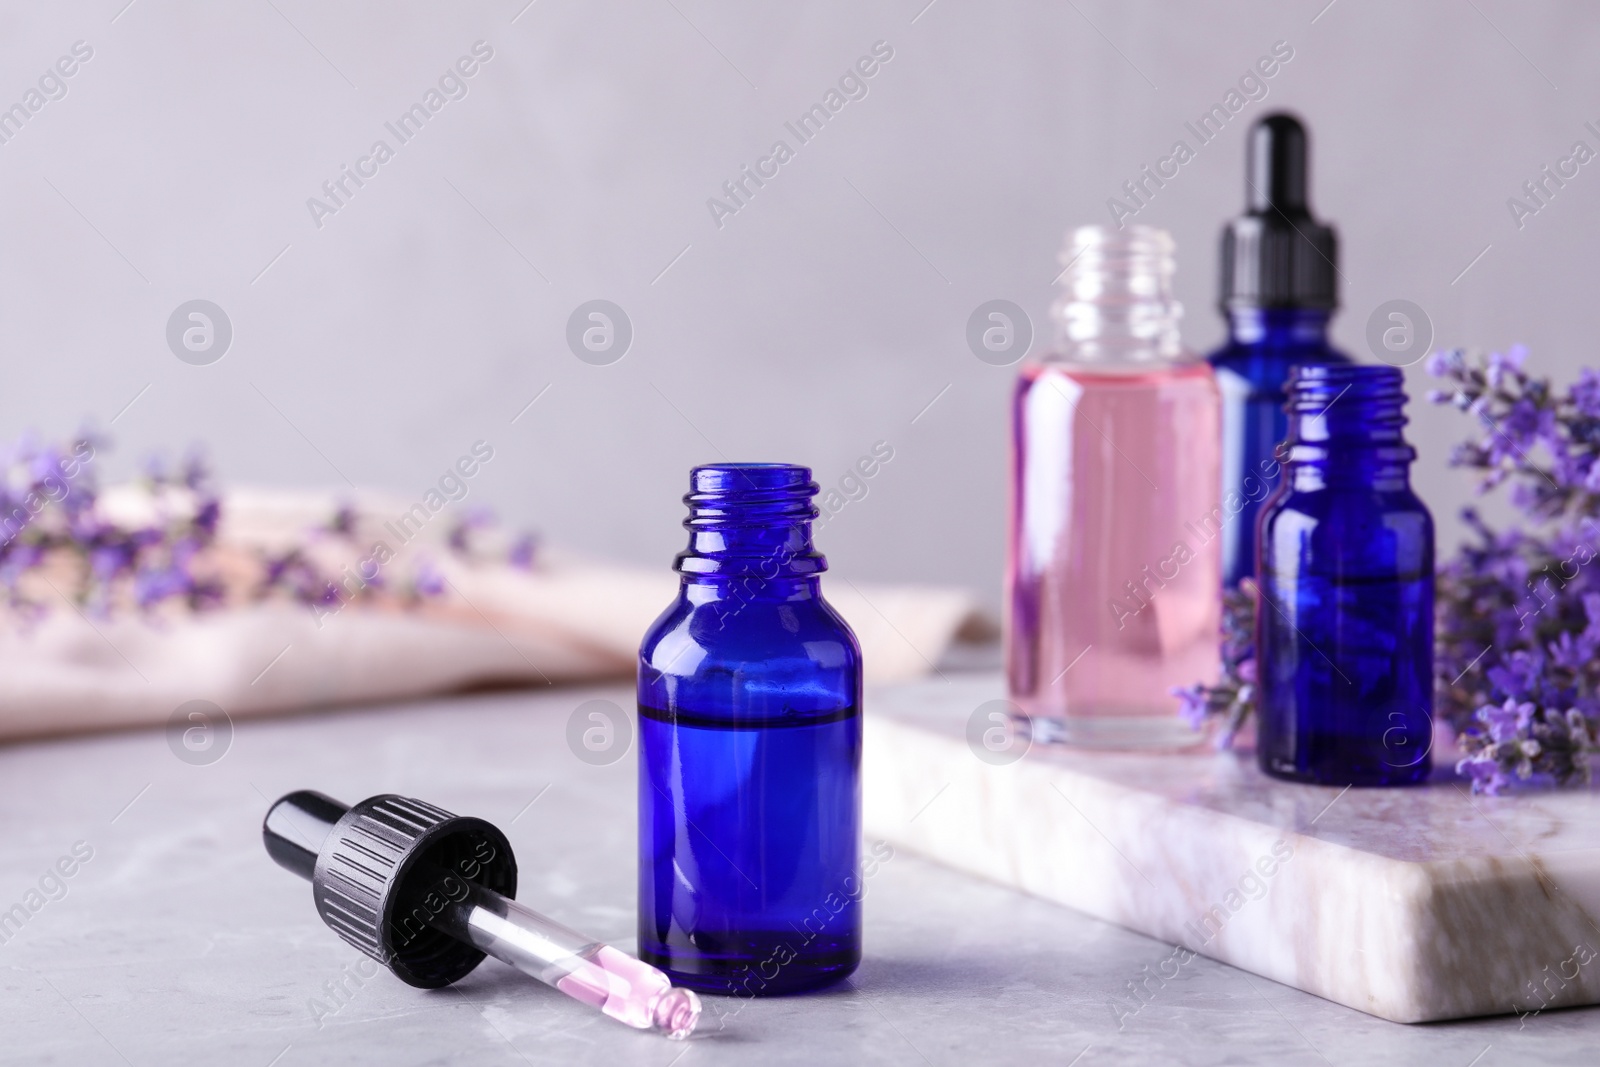 Photo of Bottles of lavender essential oil on marble table